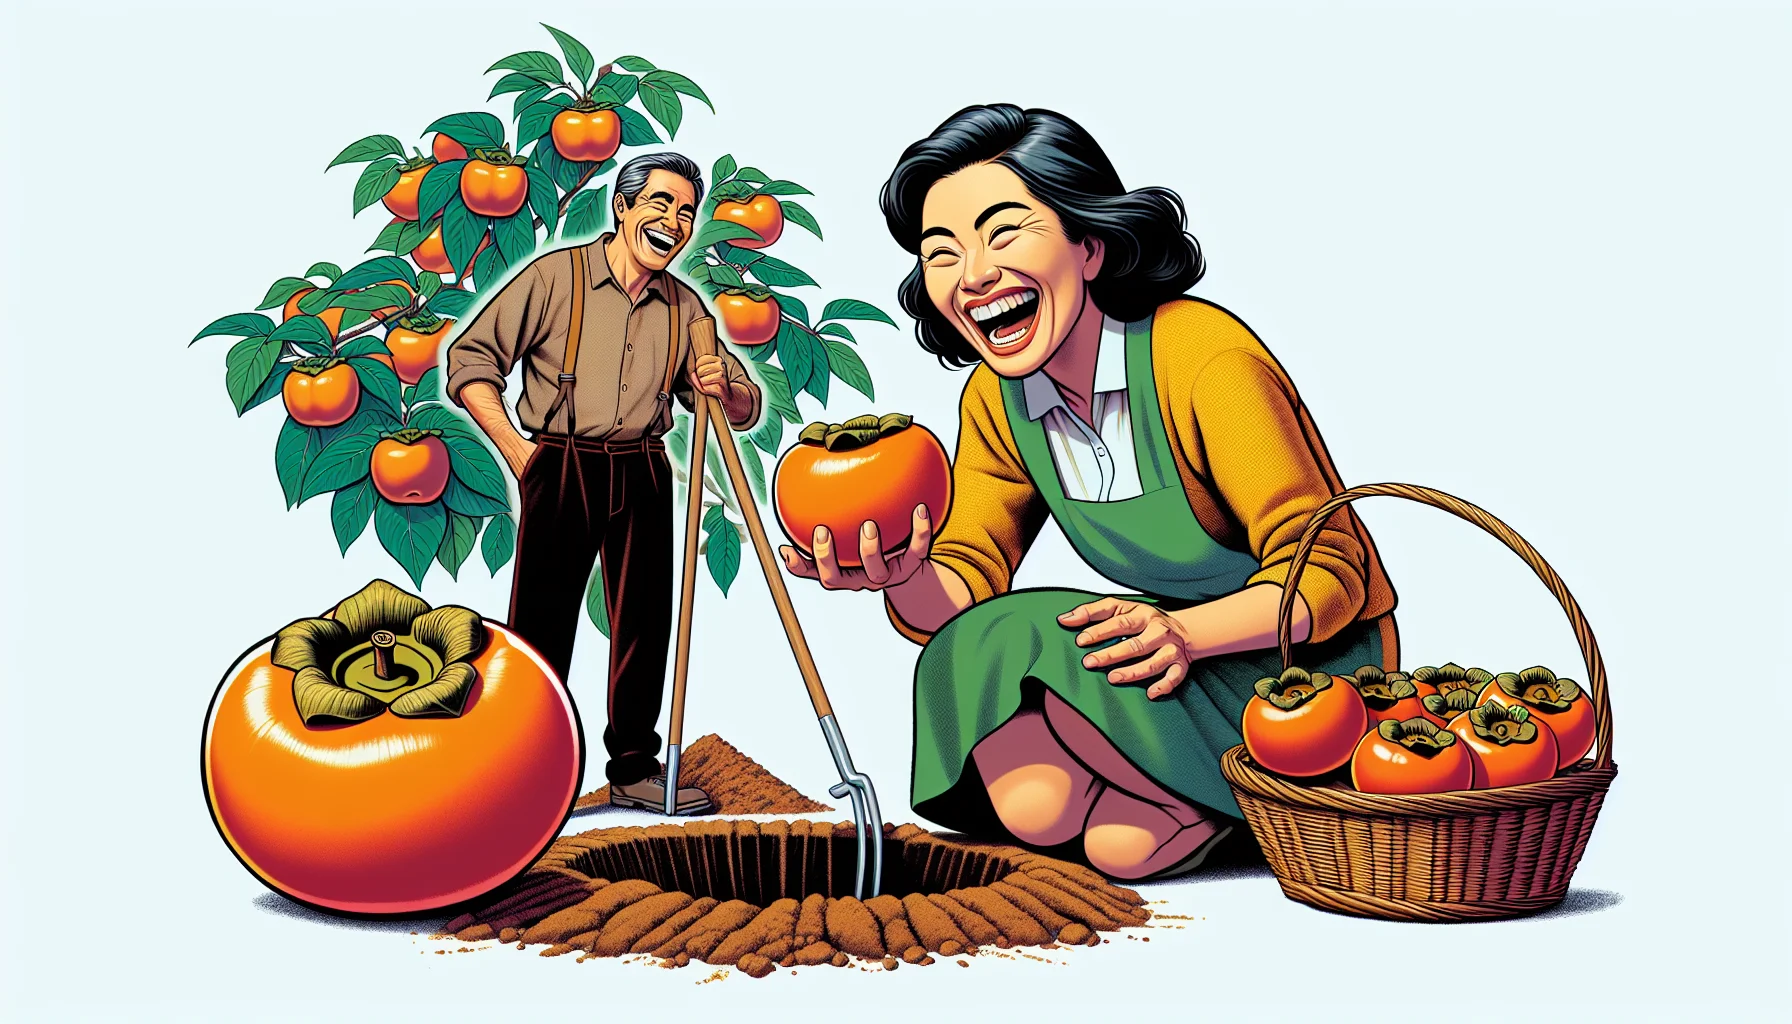 Generate an illustration depicting an entertaining gardening scenario. In the centre, there is a Hispanic woman laughing as she tries to bite into a large, juicy persimmon, it slips from her hand and serendipitously lands in a newly dug hole; could it grow into a new tree? On her right, a Caucasian man is chuckling at this playful incident, holding a basket full of ripe persimmons from their garden, illustrating the bountiful joy of home farming